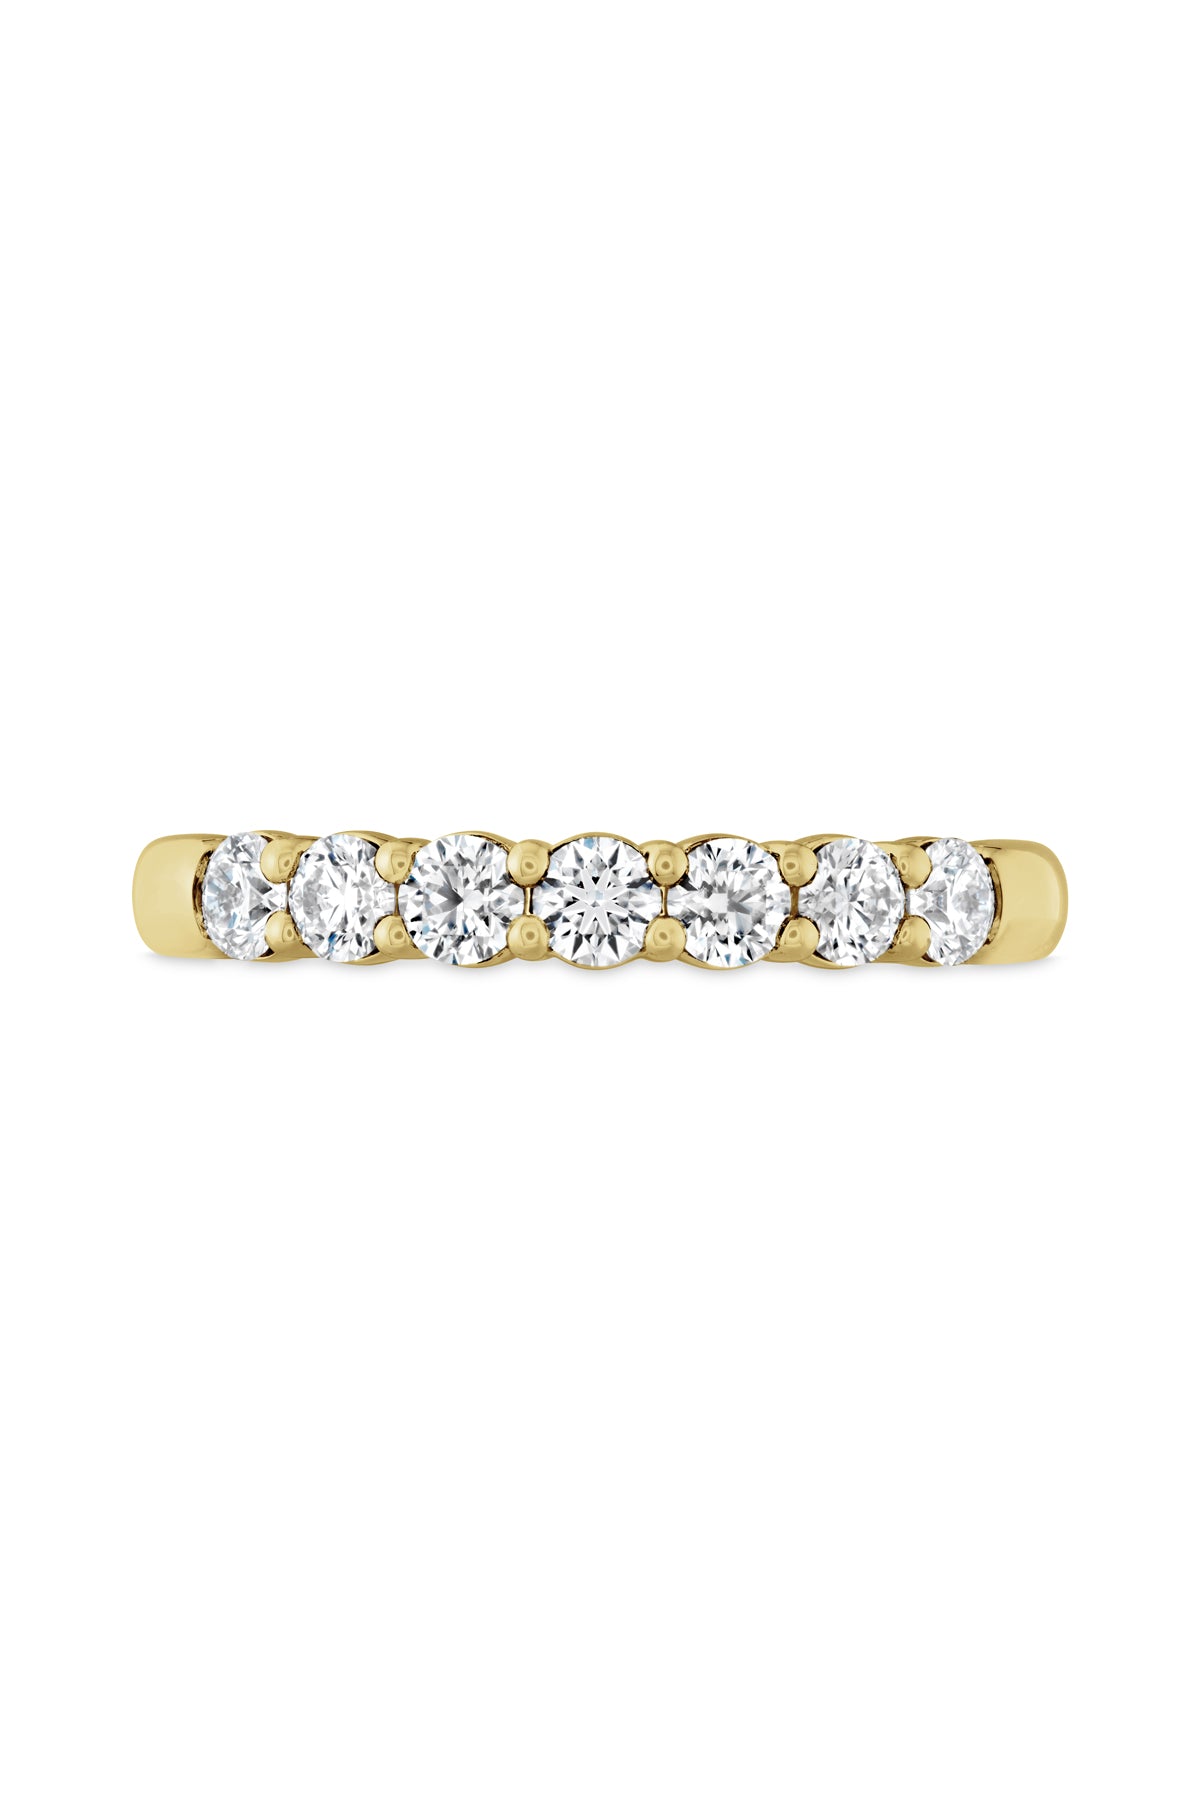 Signature 7 Stone Band From Hearts On Fire available at LeGassick Diamonds and Jewellery Gold Coast, Australia